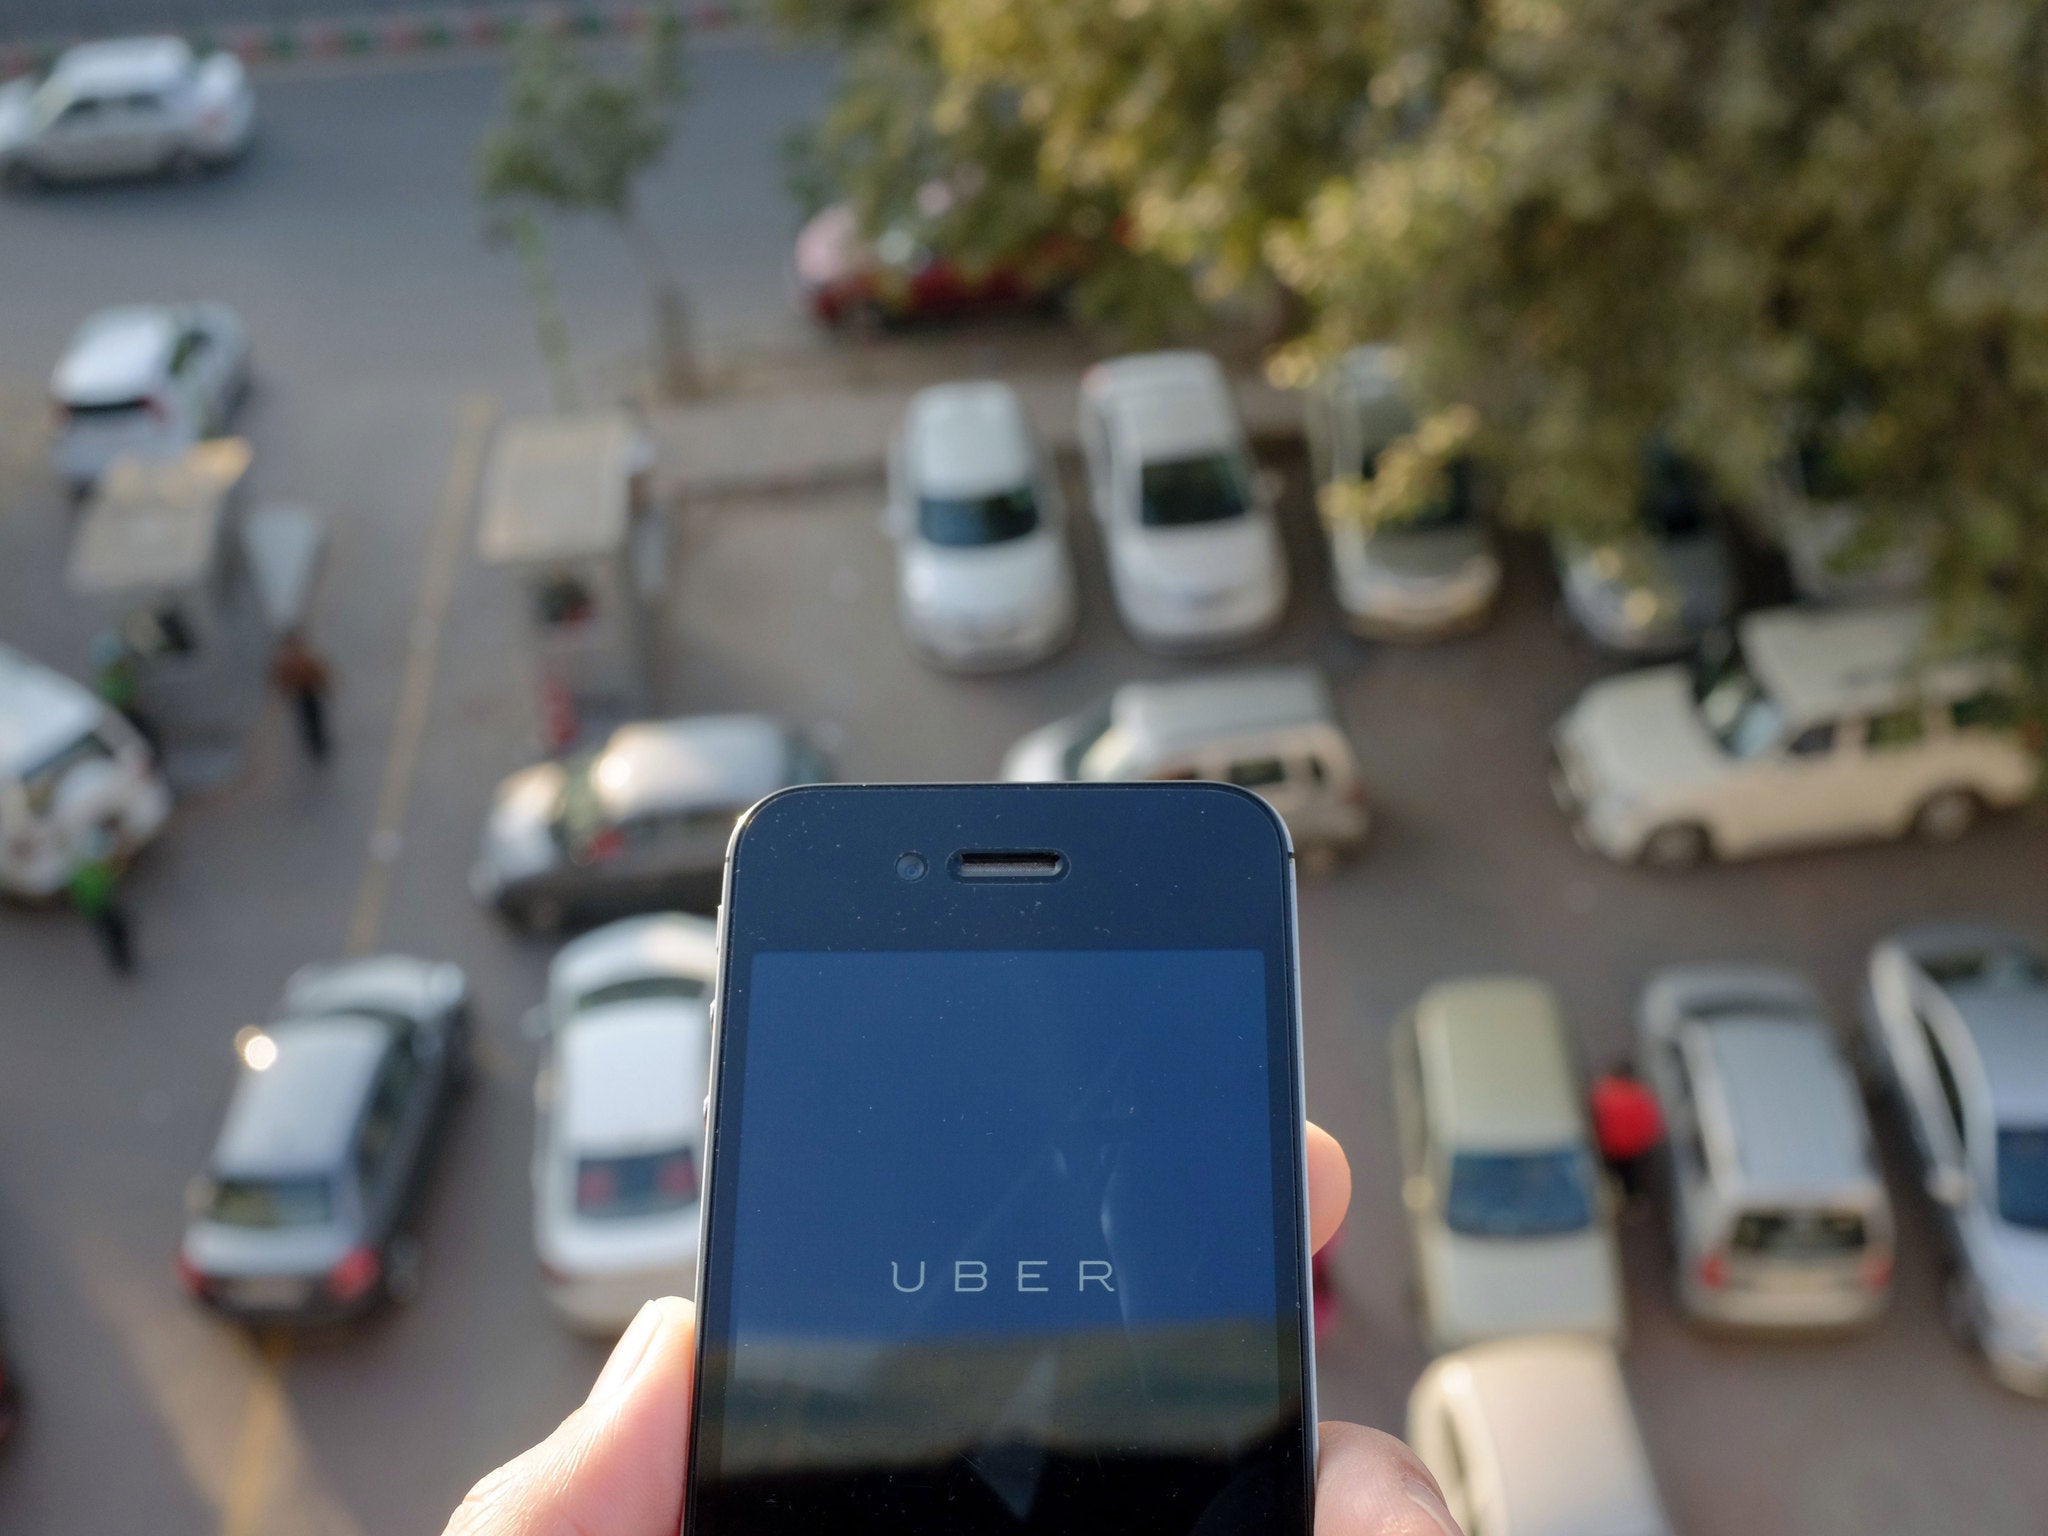 The Uber smartphone app, used to book taxis using its service, is pictured over a parking lot in the Indian capital New Delhi on December 7, 2014